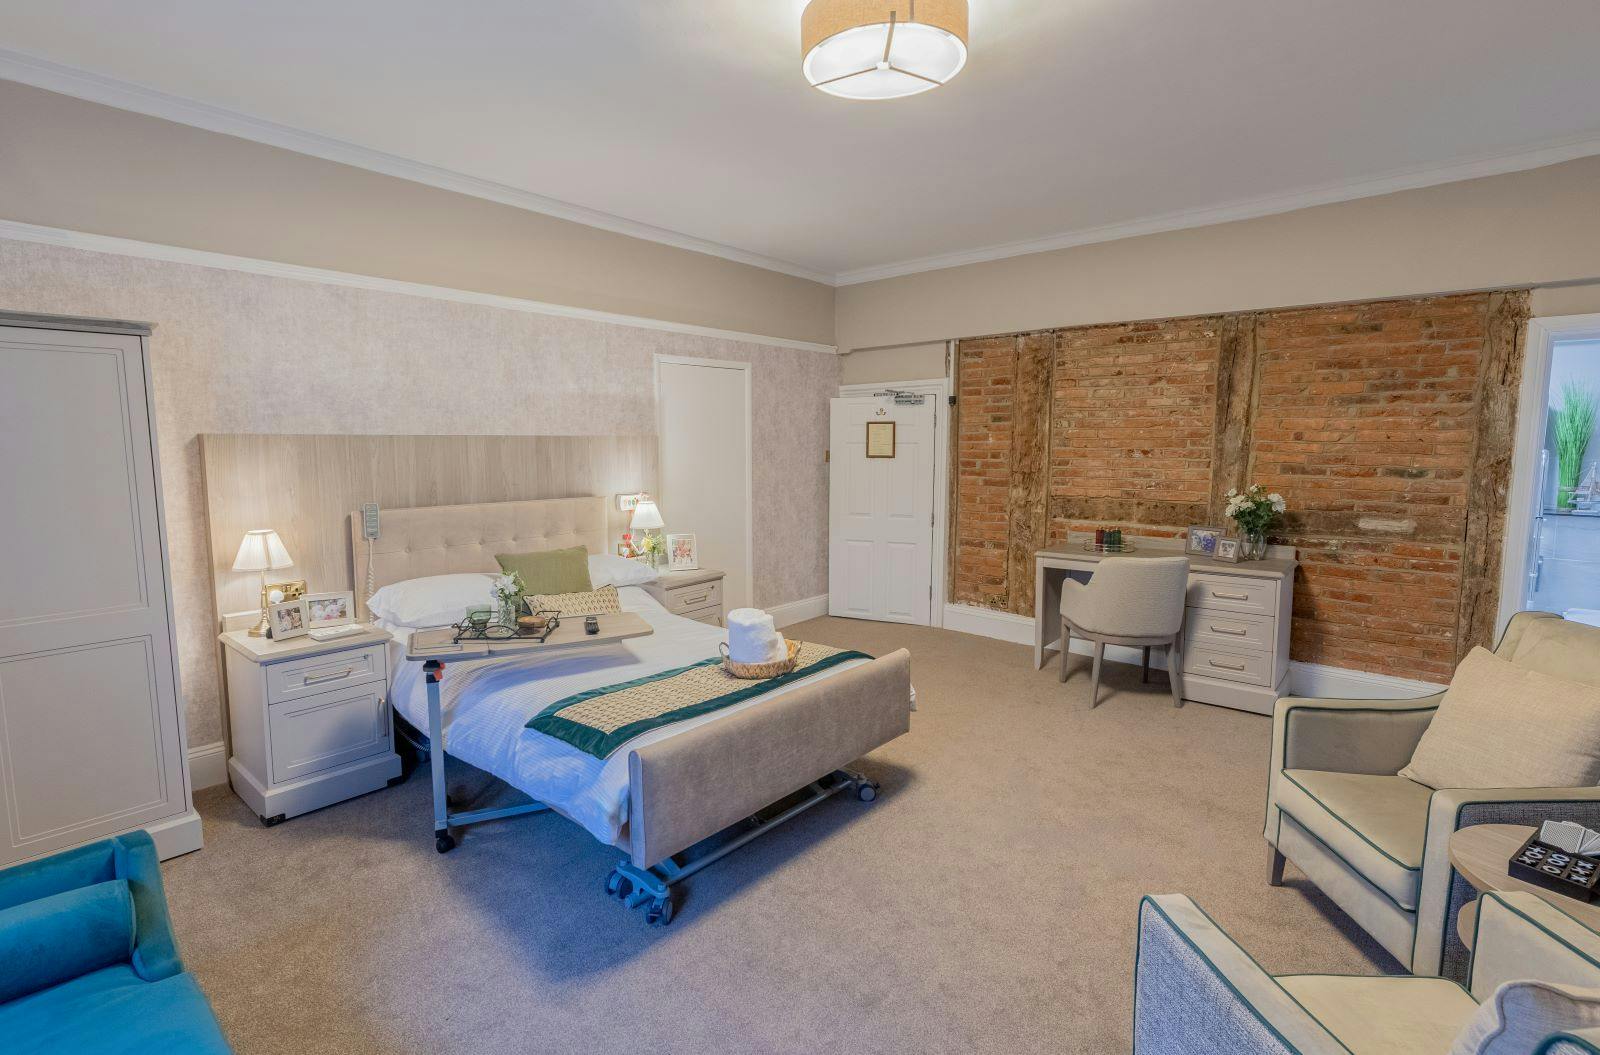 Bedroom at Coxhill Manor Care Home in Woking, Surrey